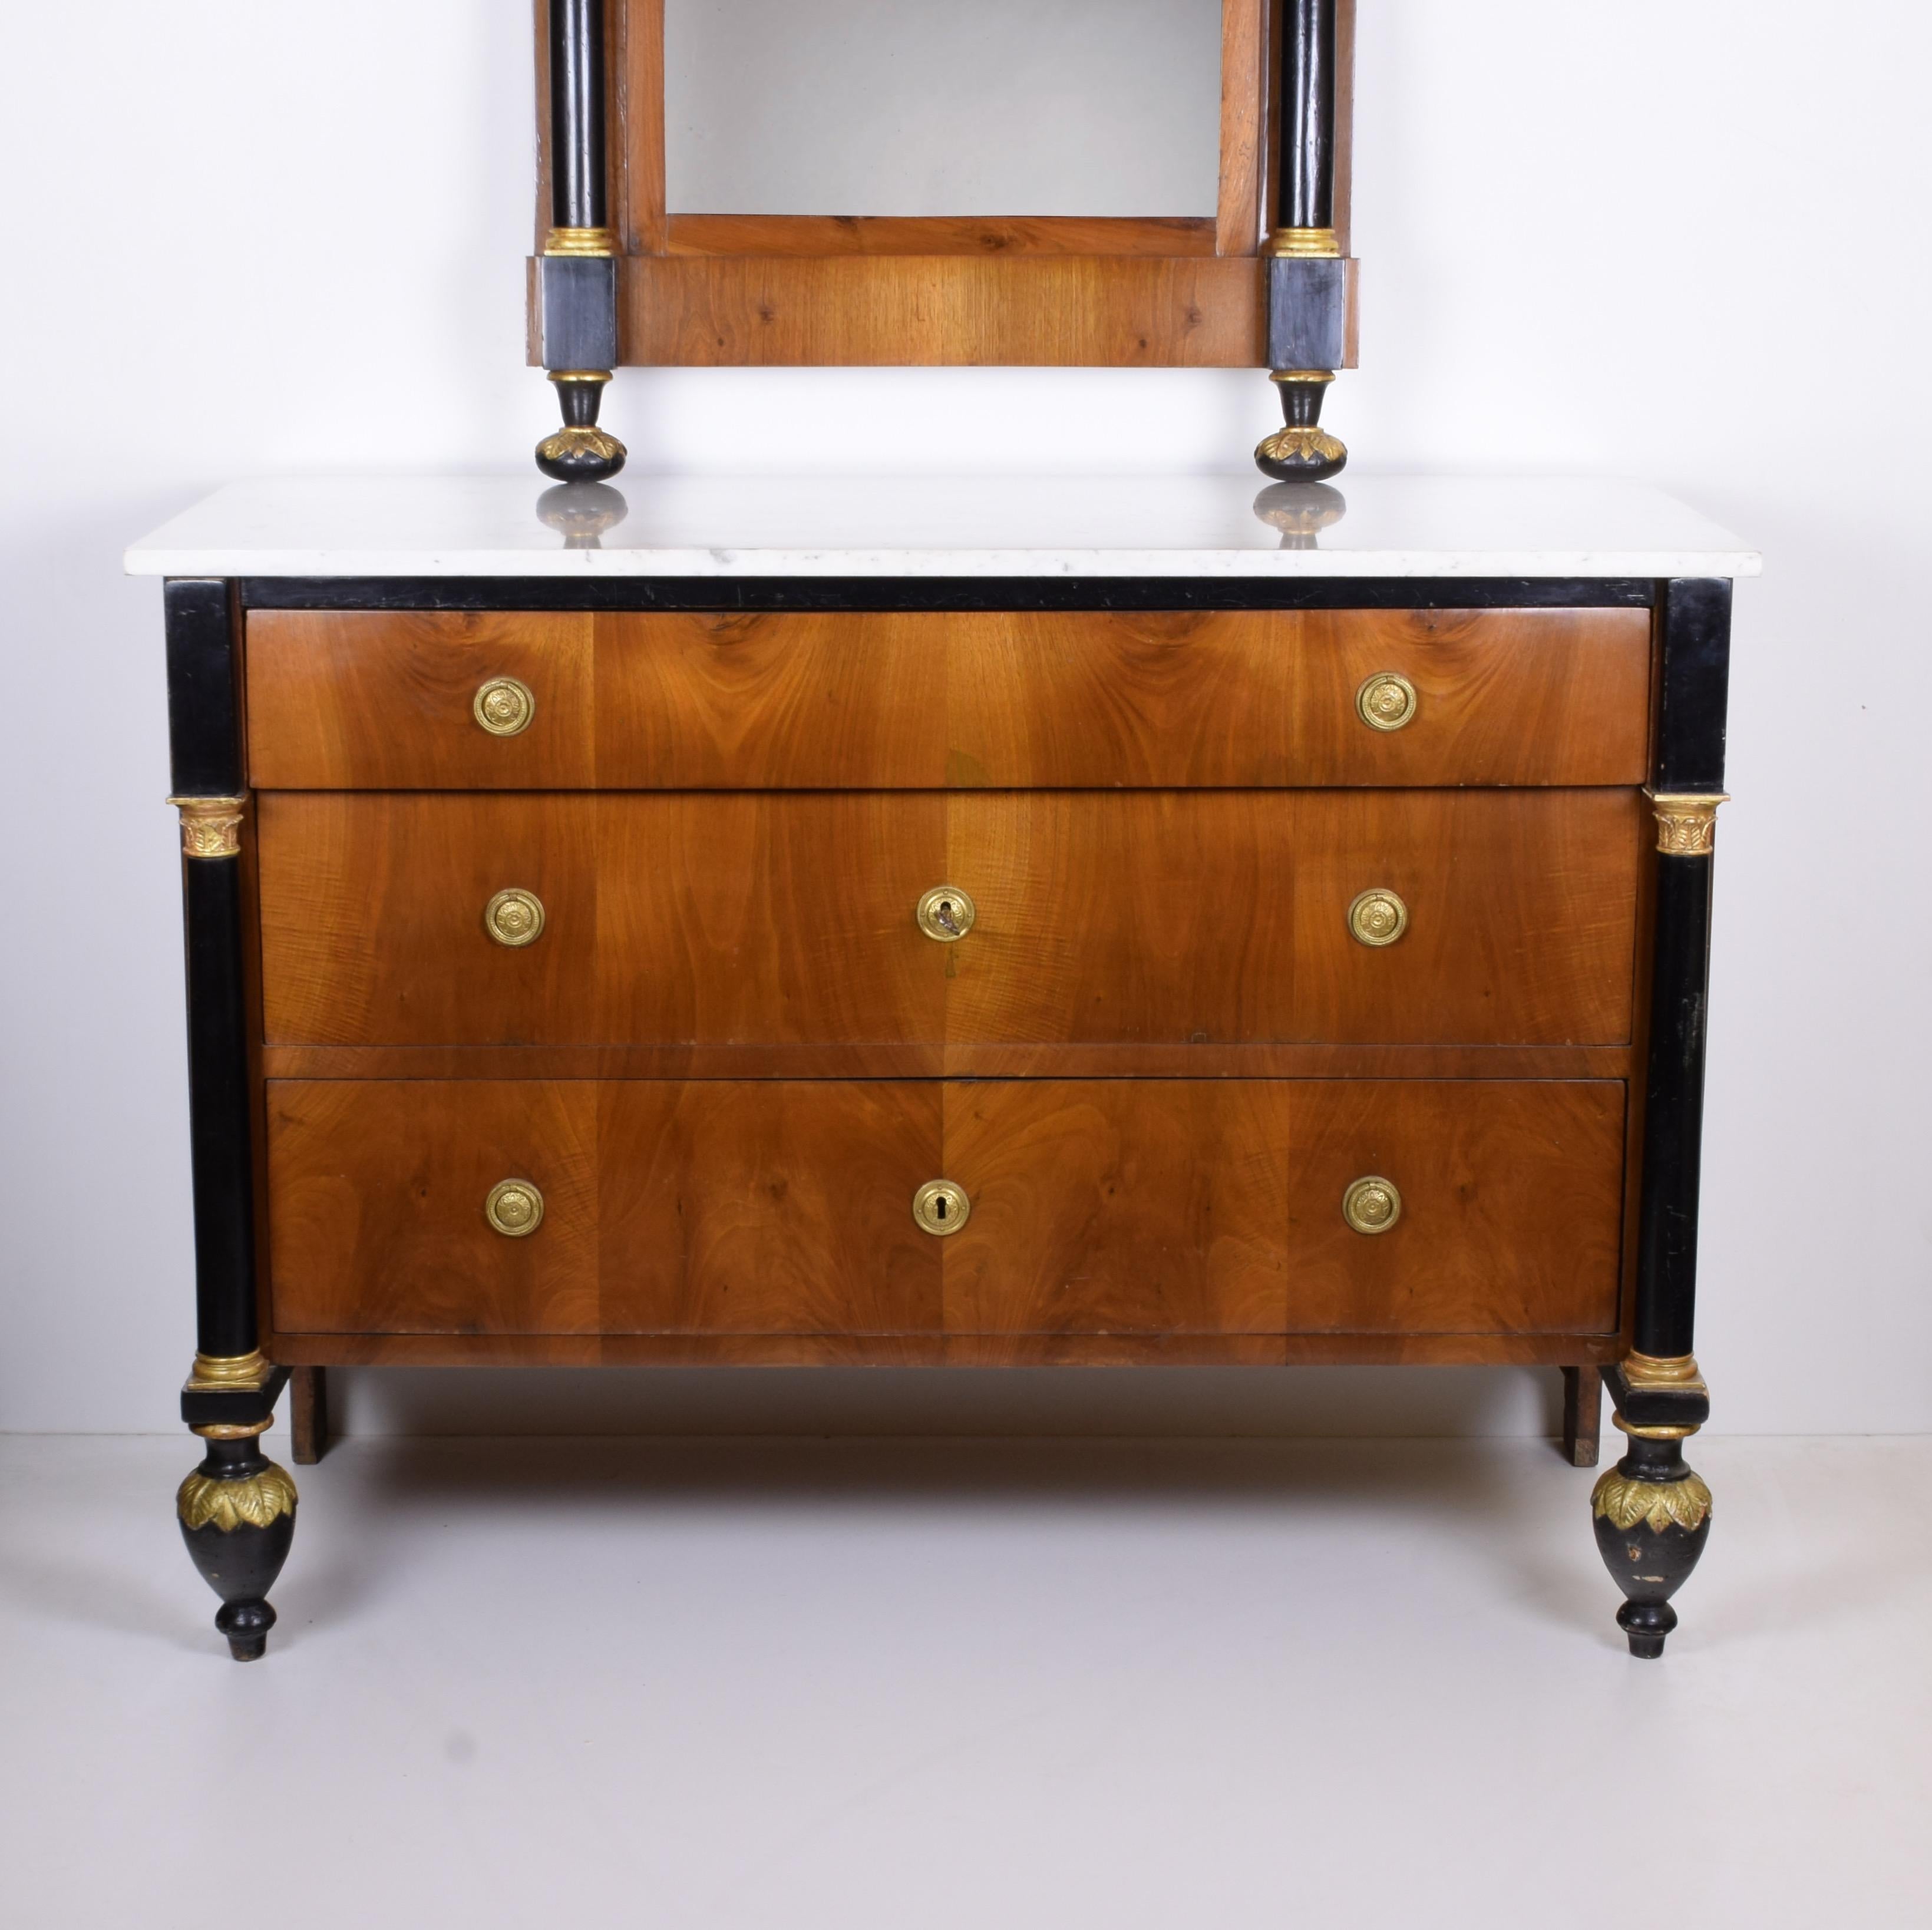 Italia, 1810
Walnut veneer
Top in white Carrara marble
Columns in ebonized wood
Bases, capitals and paw carvings gilded in pure gold
Good conditions
Chest of drawers W126 x D56.5 x H91.5 cm
Mirror W80 x H127.